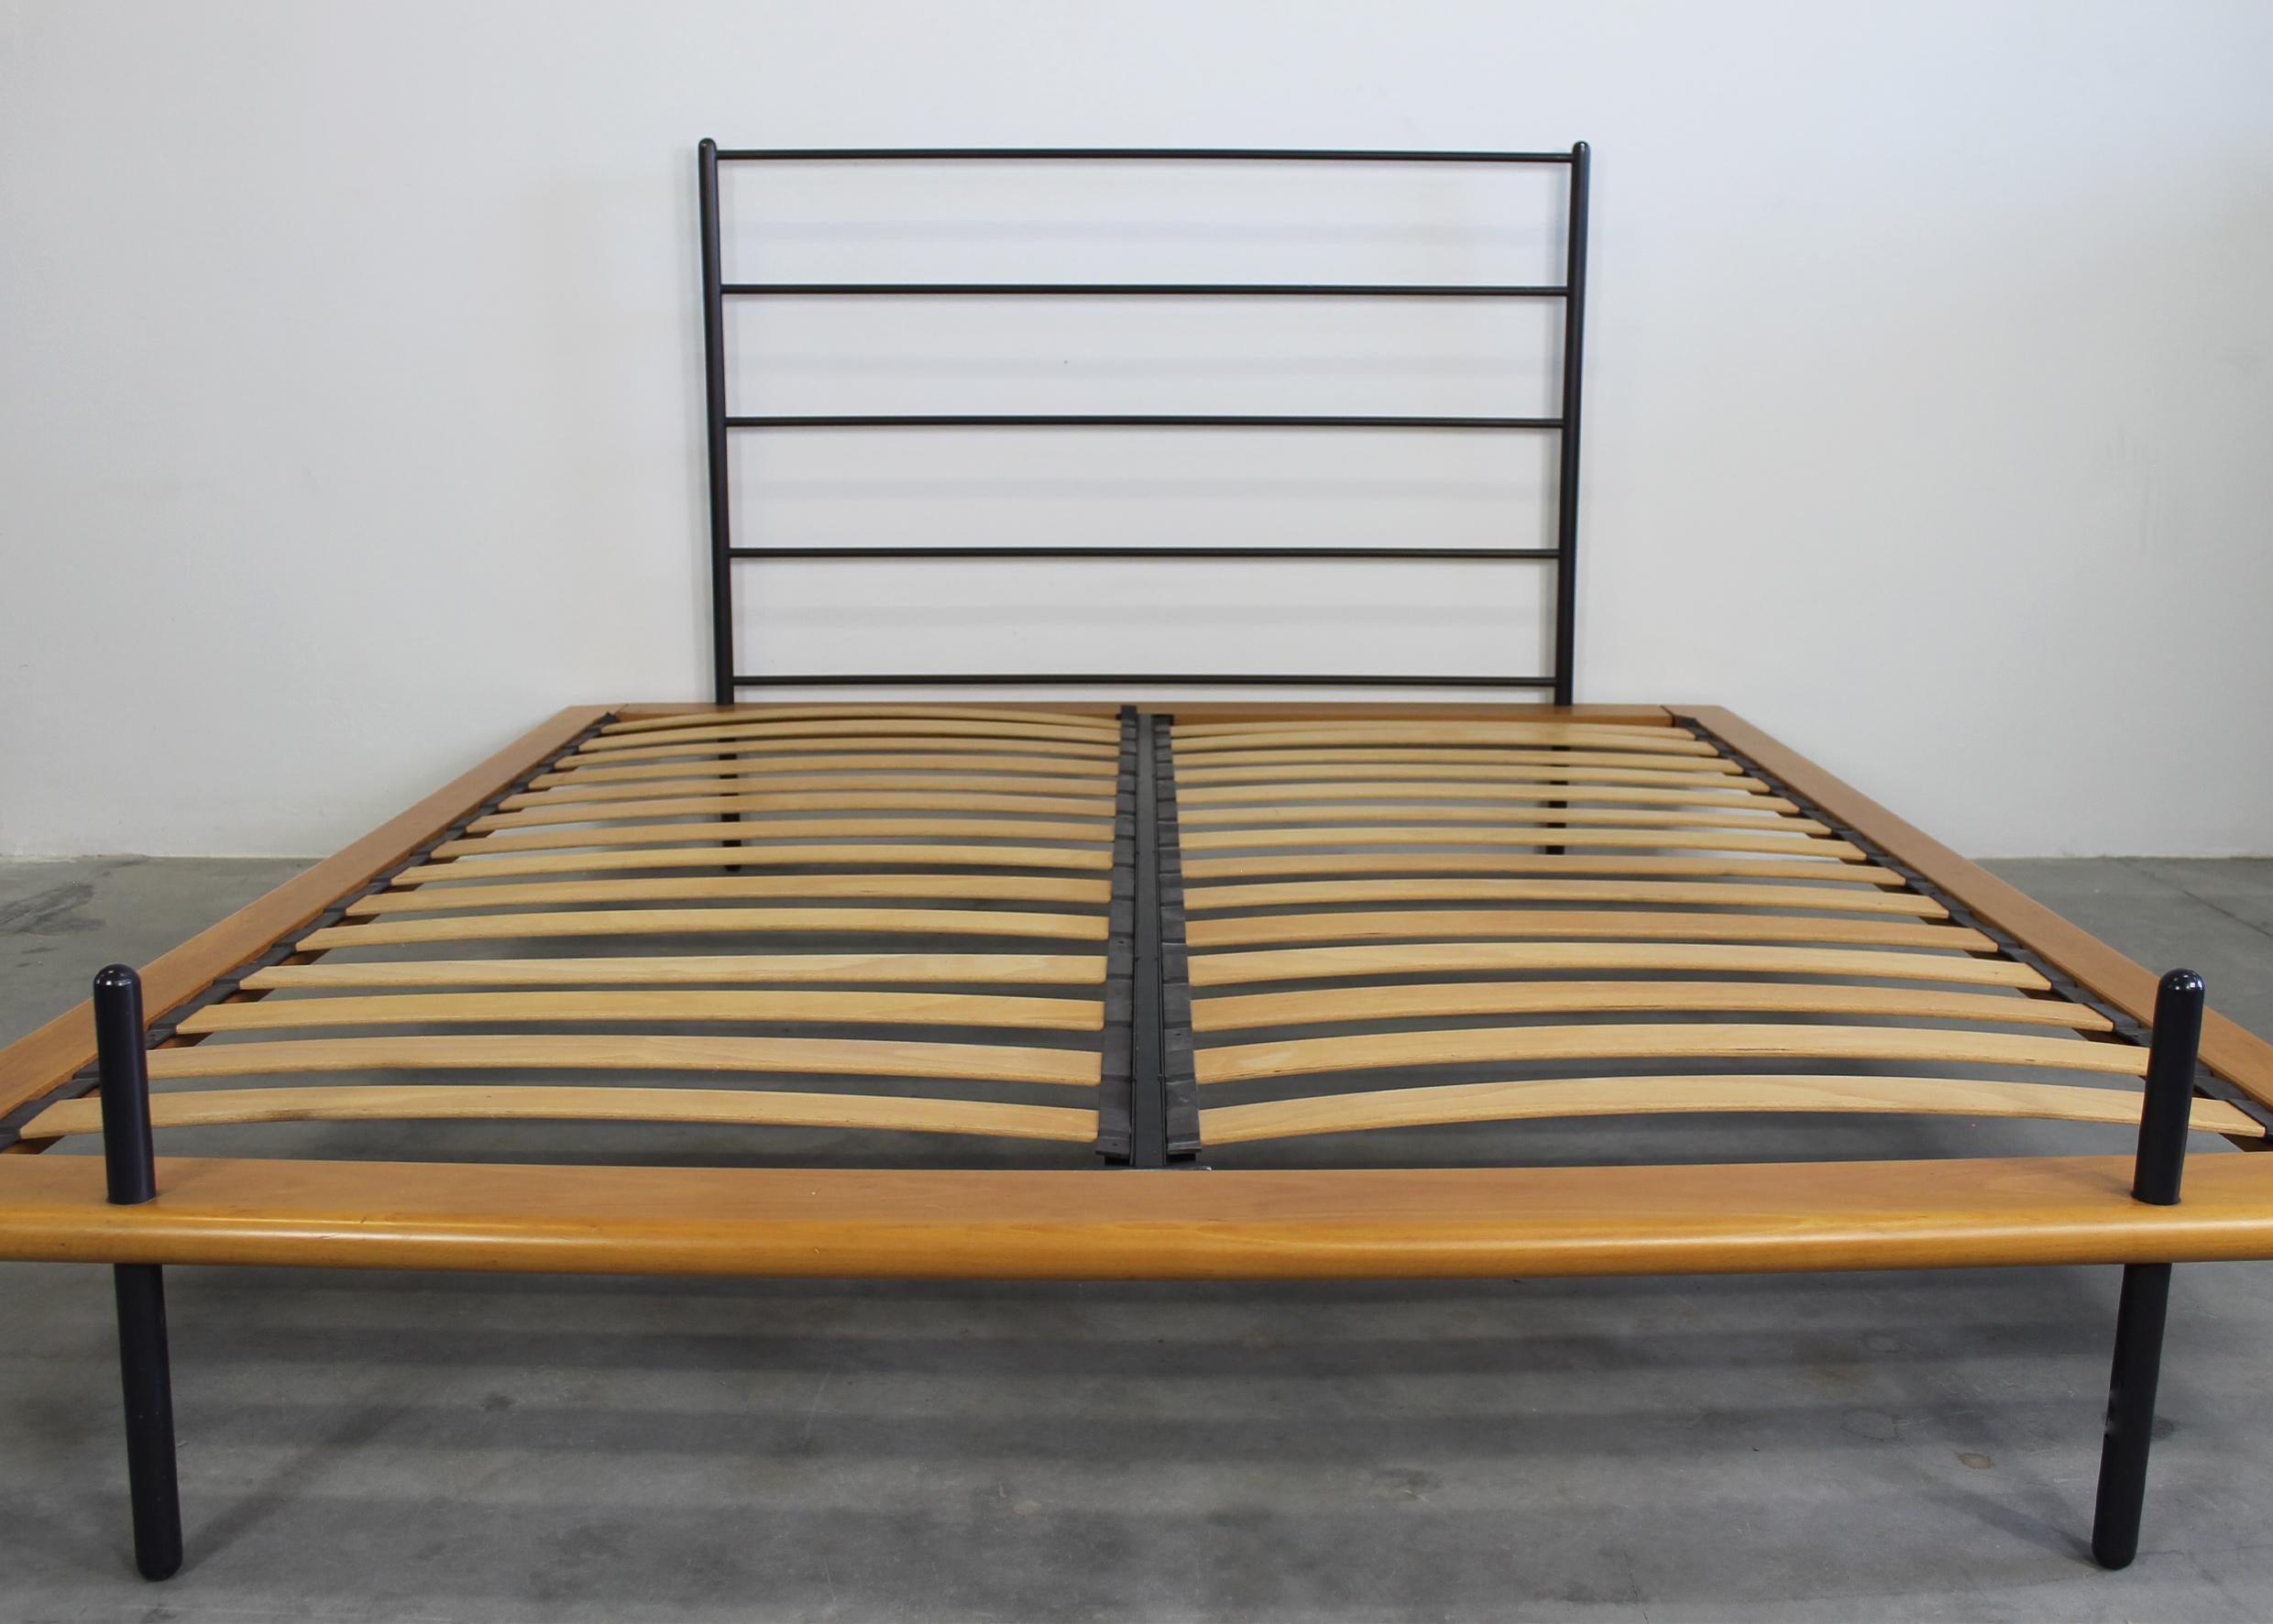 Modern Paolo Pallucco Acquariano Bed Structure in Beechwood and Steel 1980s Italy